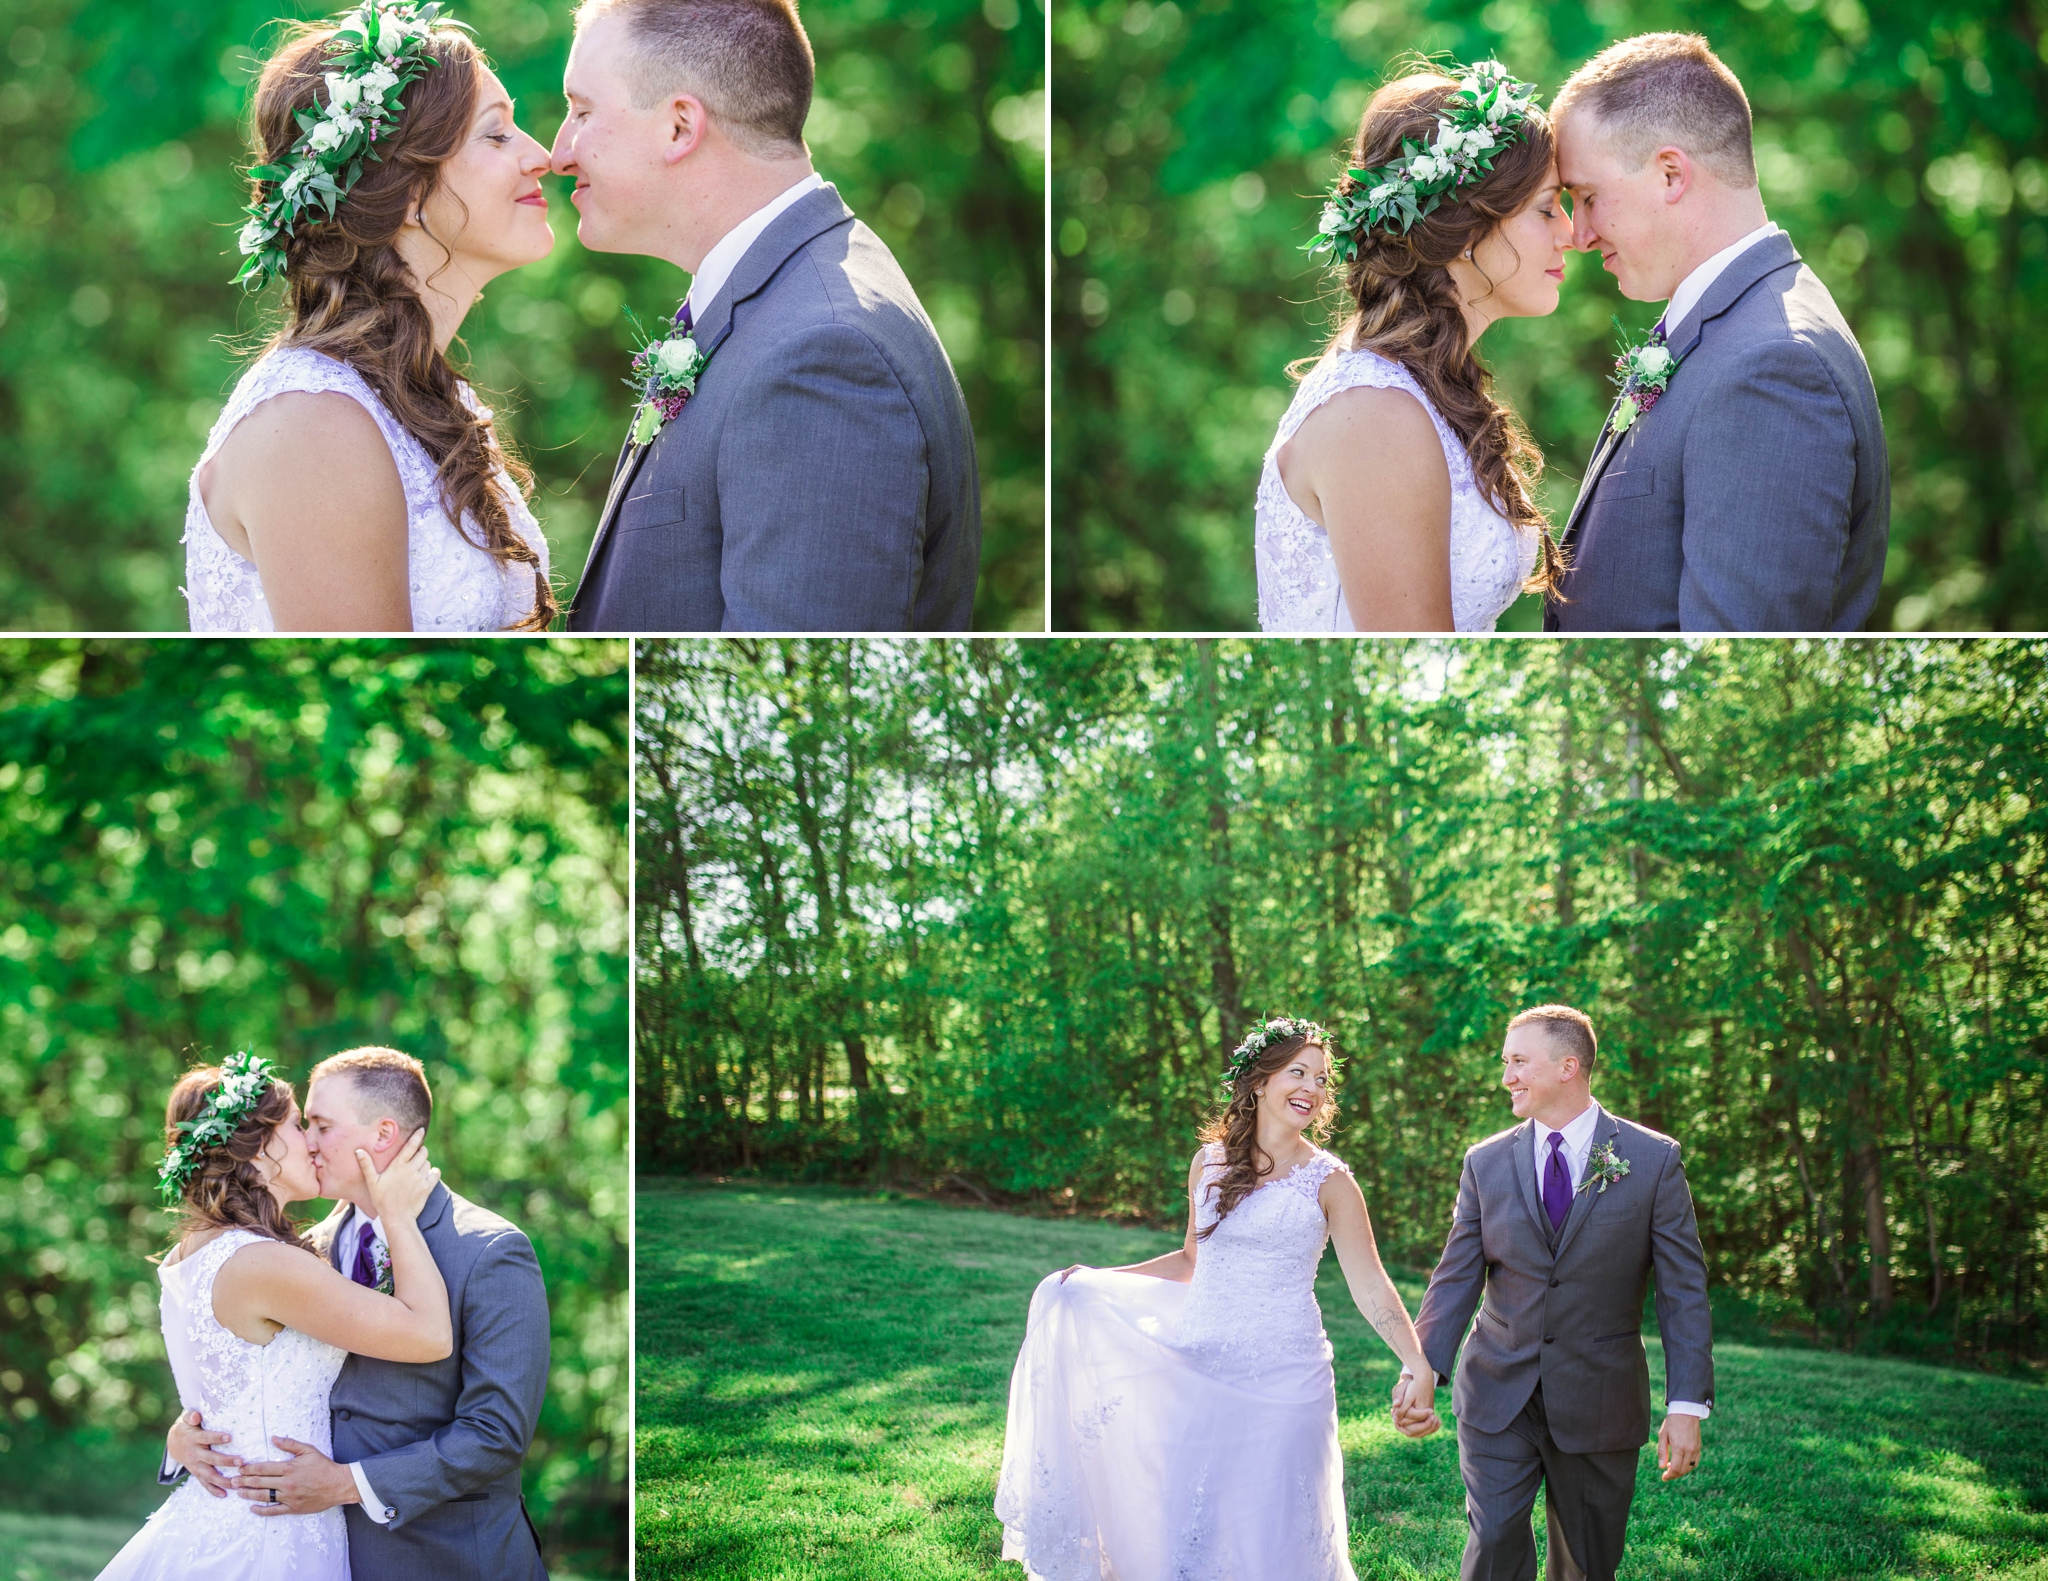 Jessica + Nathan - Wedding at the Lily Pad in Whitsett, NC - Raleigh North Carolina Photographer